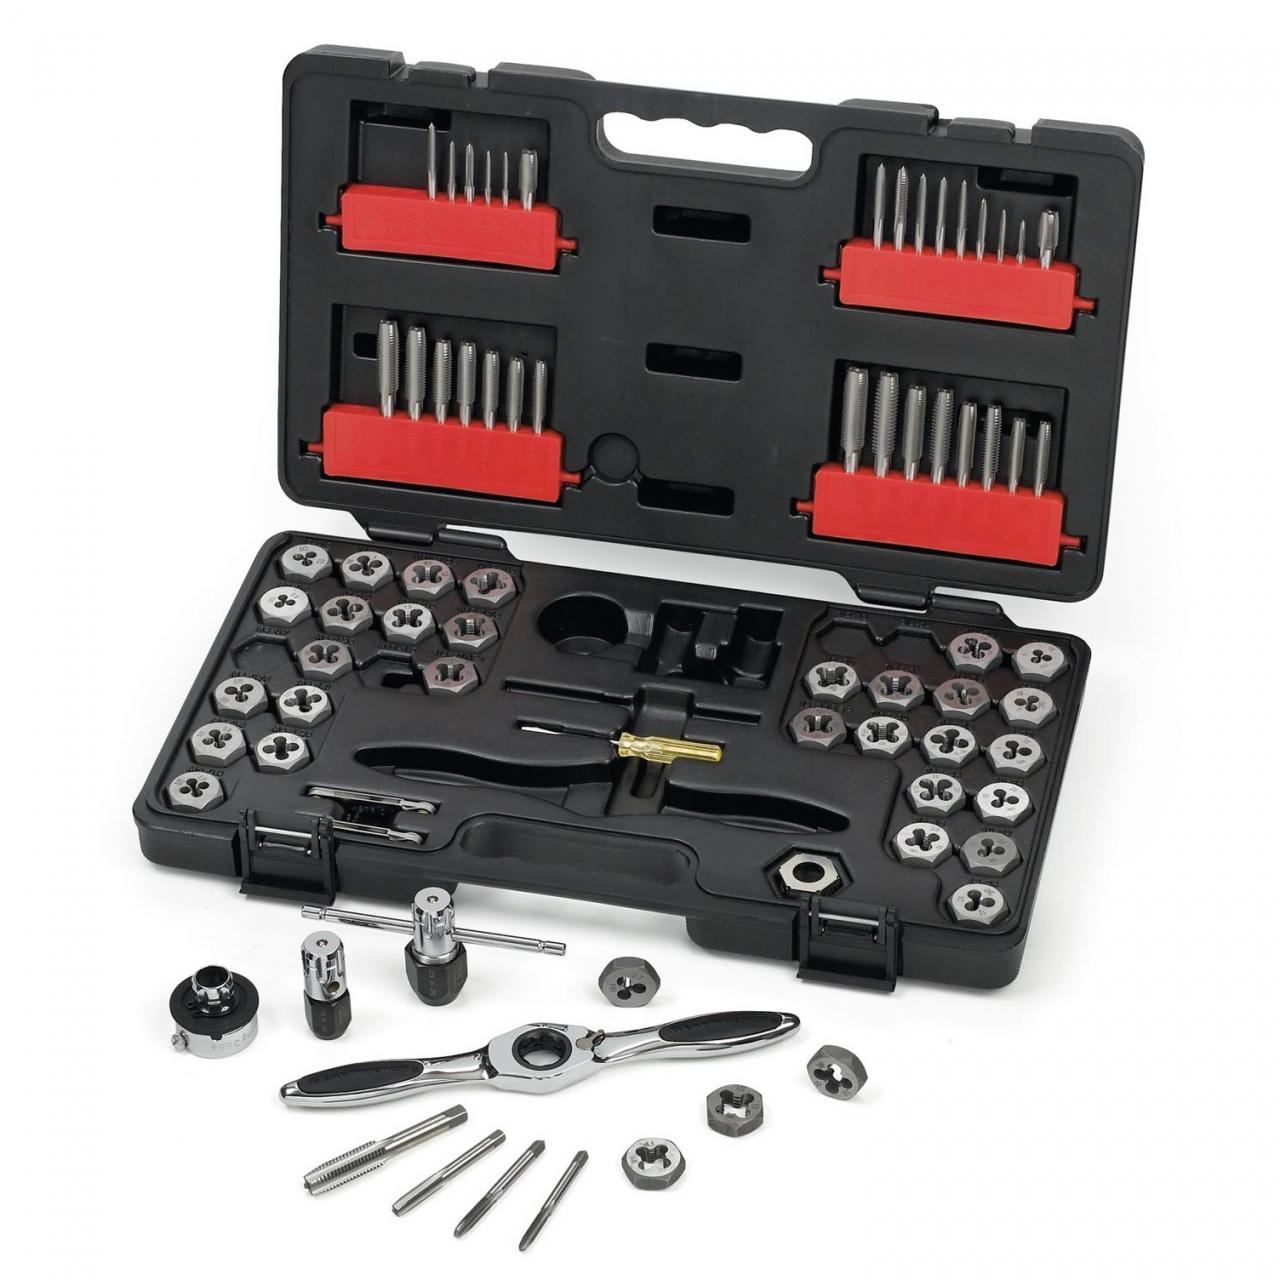 GEARWRENCH 3887 Ratcheting Tap and Die 75 Piece Set - Combination  METRIC/SAE | Sale Items, Sale Items, Tap & Die Sets, Taps & Dies, Top  Sellers | Discount Trader